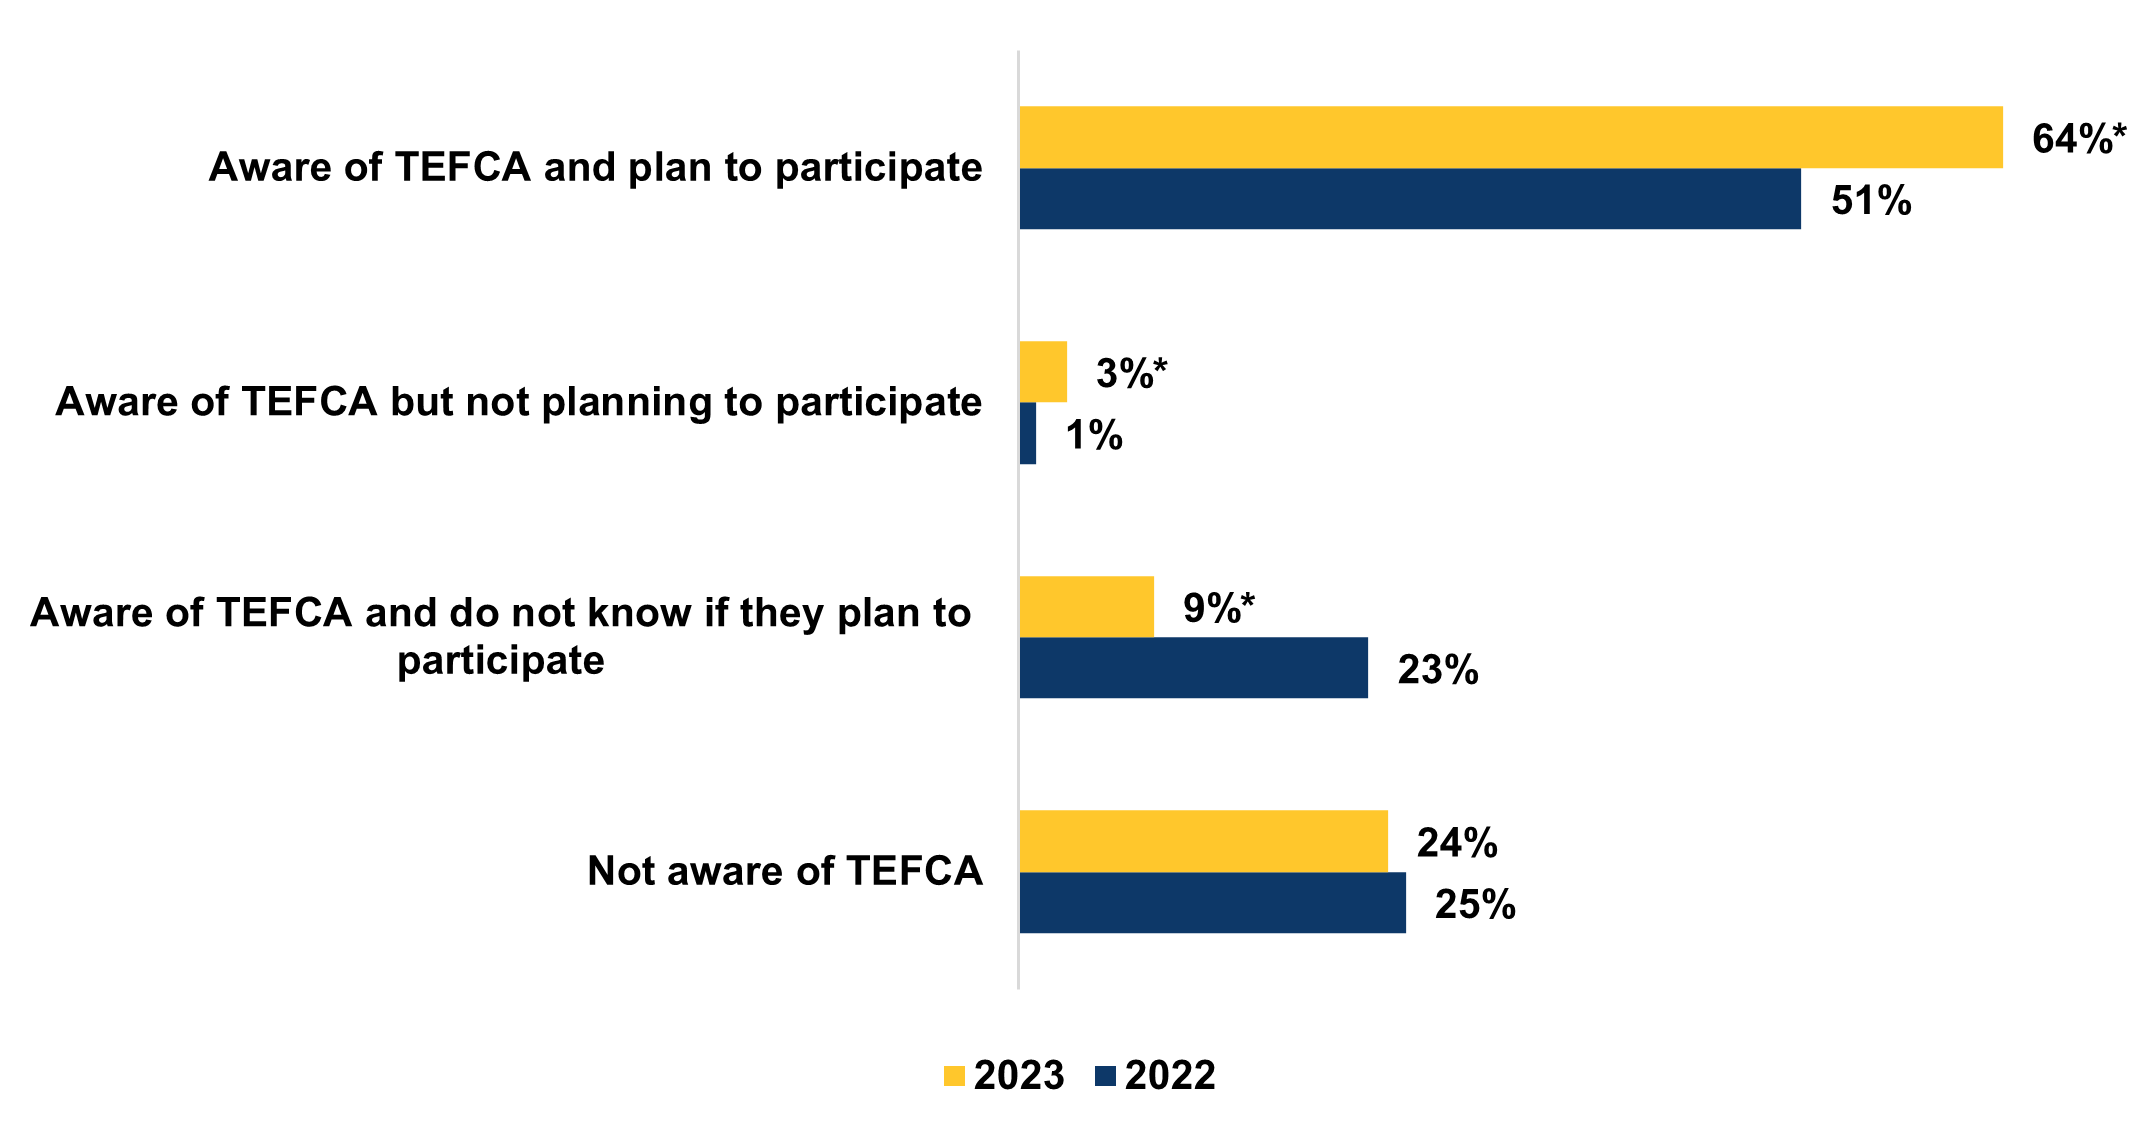 The figure contains a horizontal bar chart comparing survey responses from the years 2022 and 2023 regarding awareness and participation plans related to TEFCA. There are four categories on the vertical axis: 